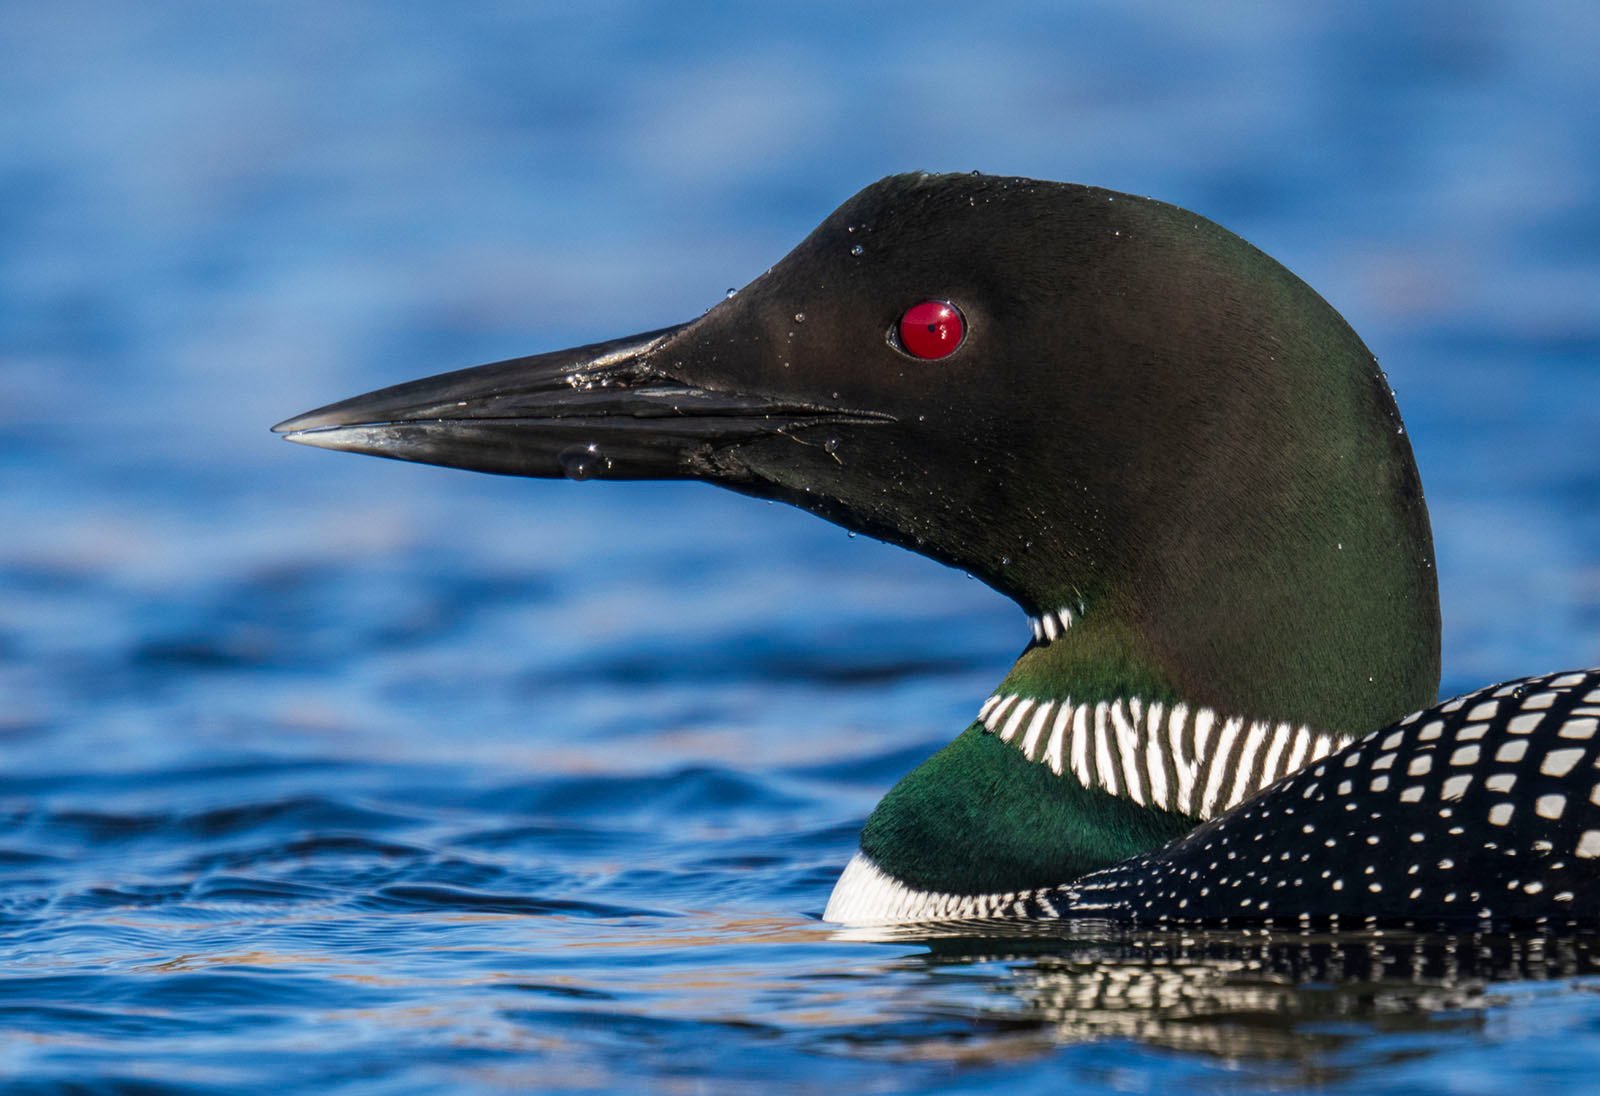 Close-up of a common loon floating on water, displaying its glossy black head, striking red eye, and patterned black and white neck.